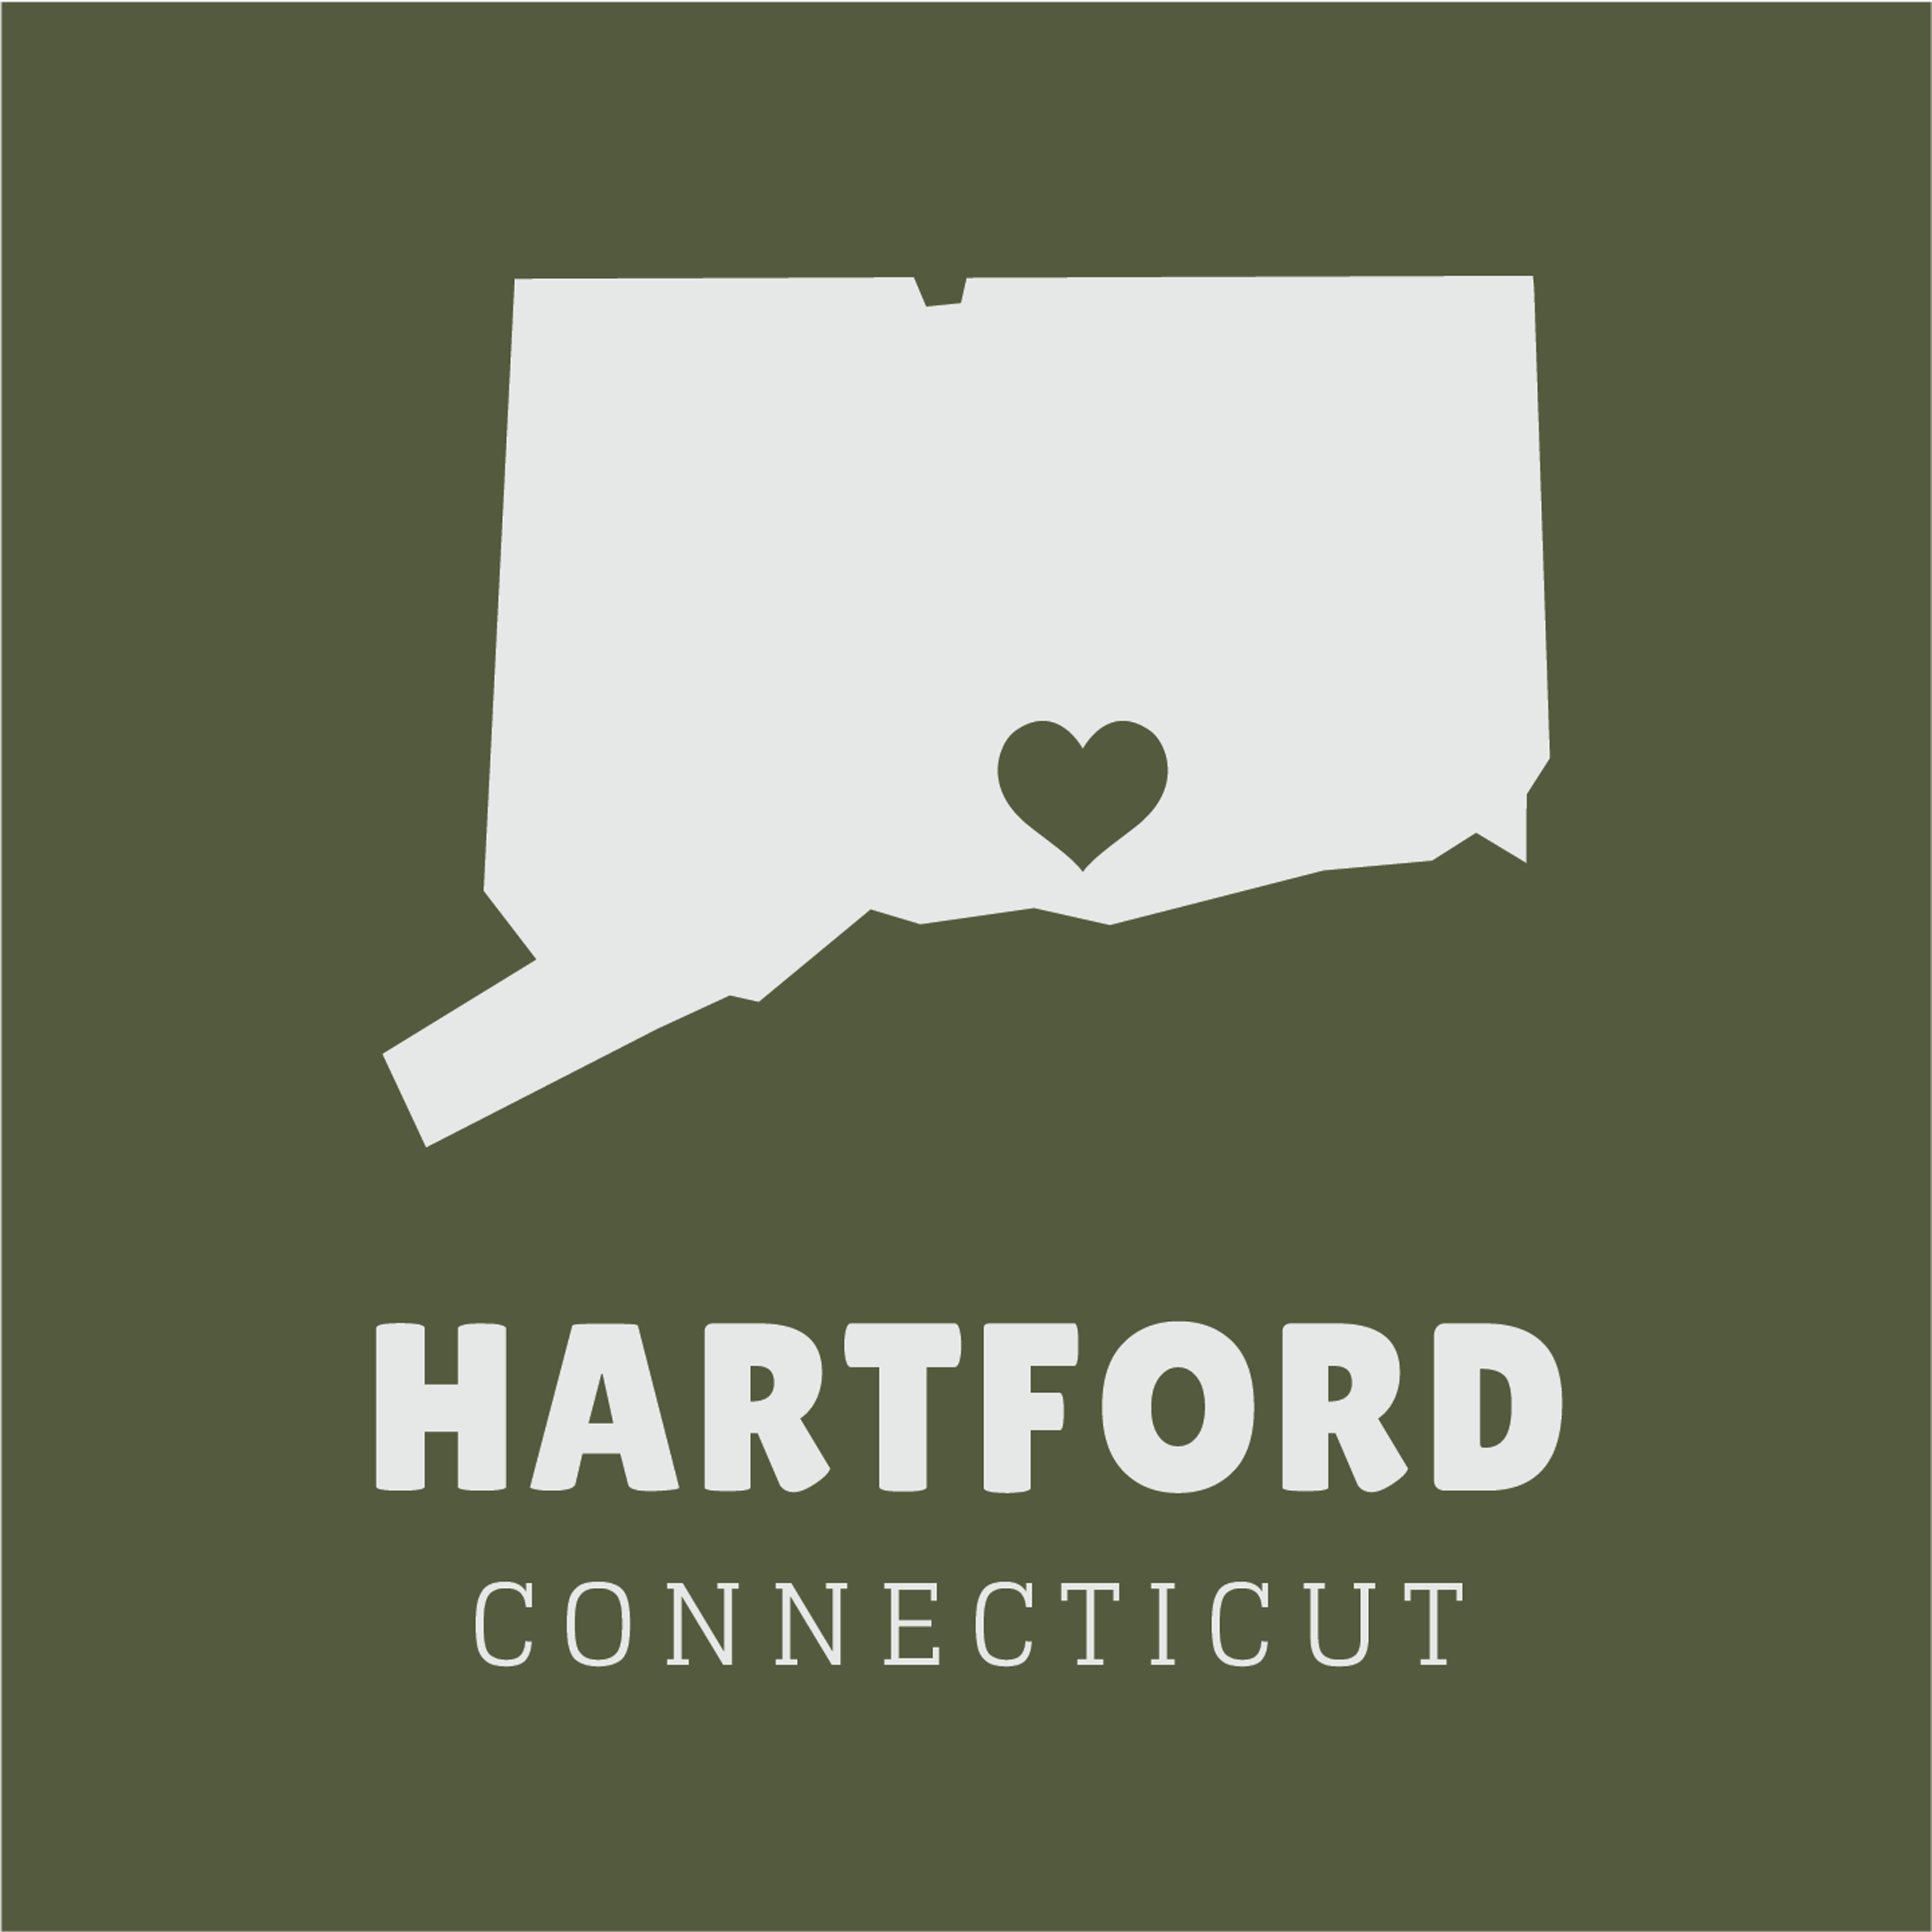 state-vector-heart-connecticut-design-theme